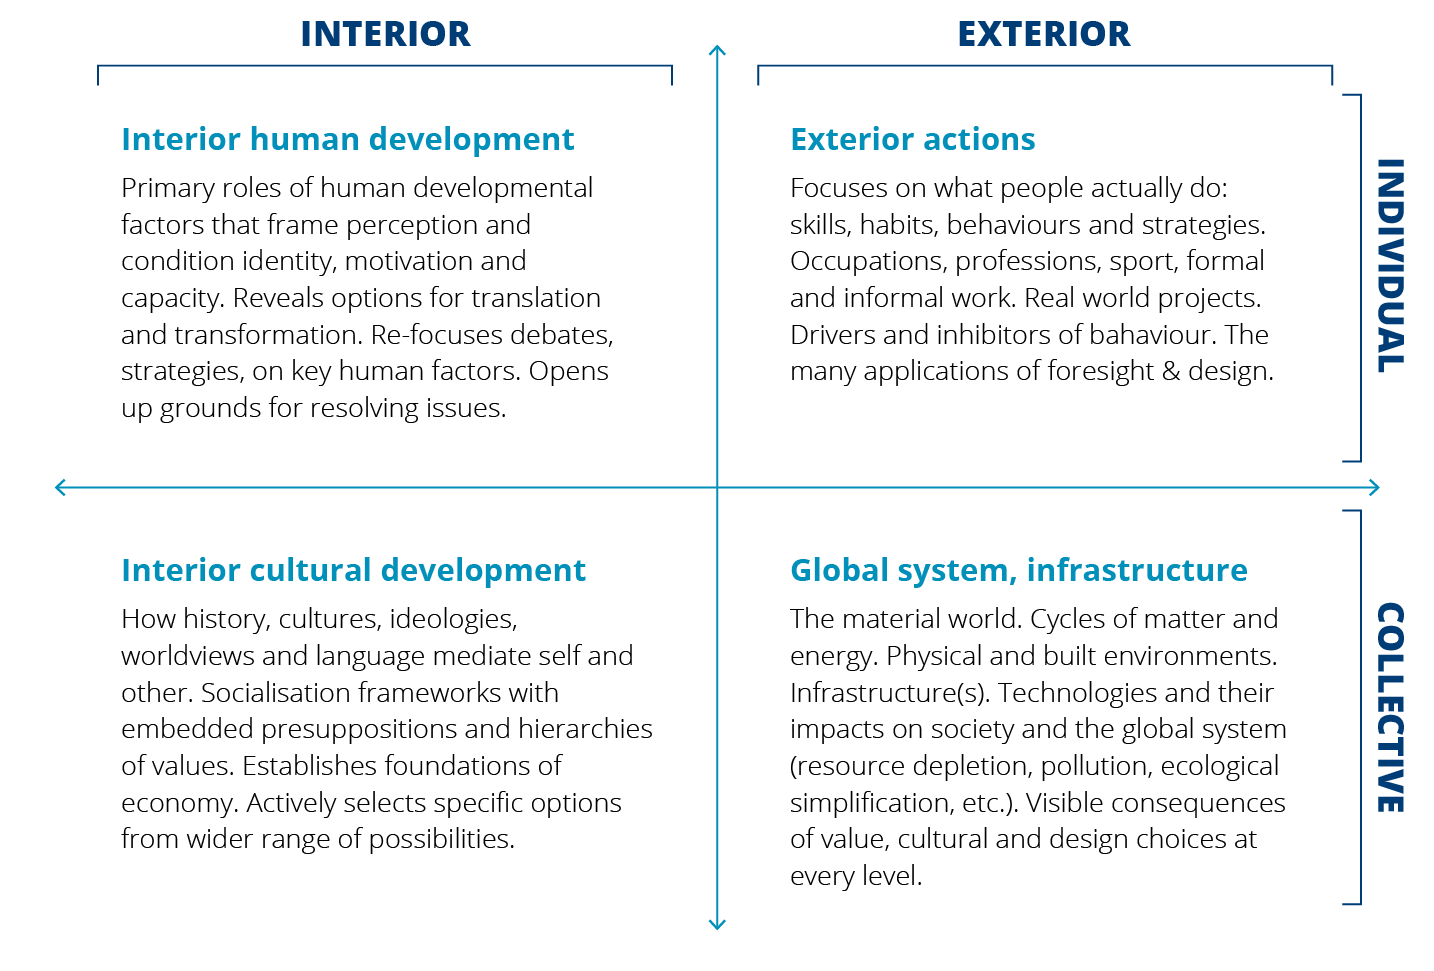 Four quandrants split by interior human development; interior cultural development, exterior actions and global sytem infrastructure